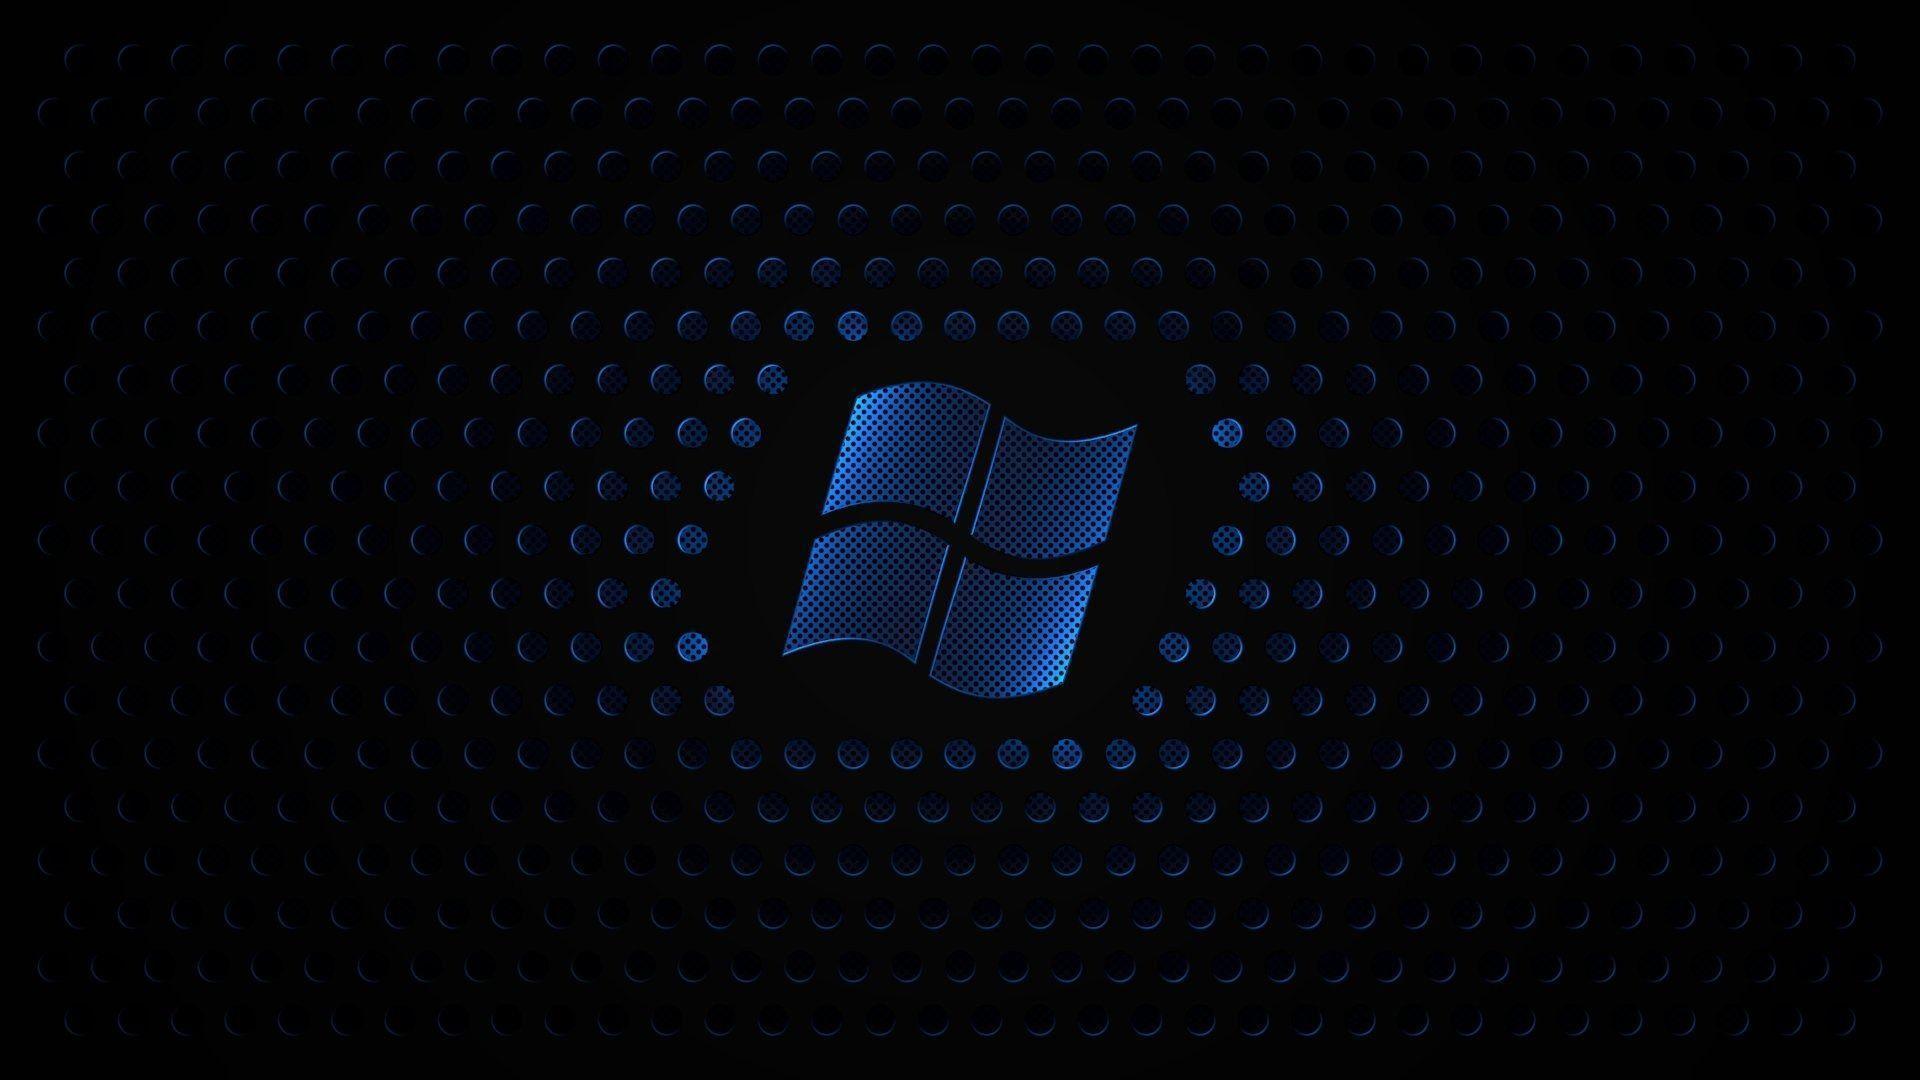 Blue Windows Sign With Black Backgrounds Hd Wallpapers